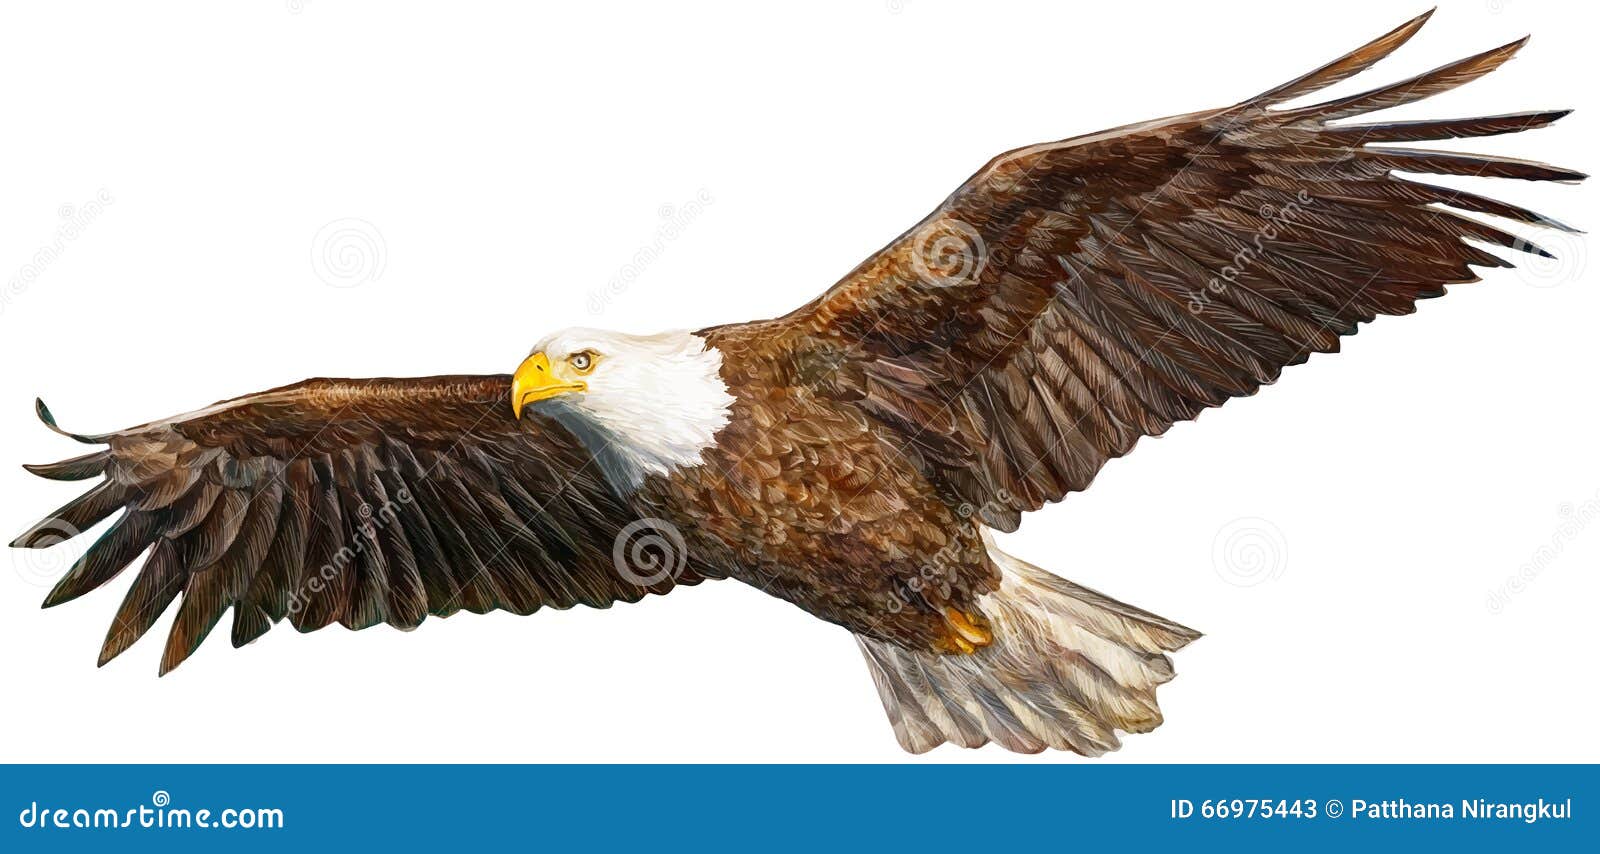 Bald eagle flying draw and paint on white Vector Image